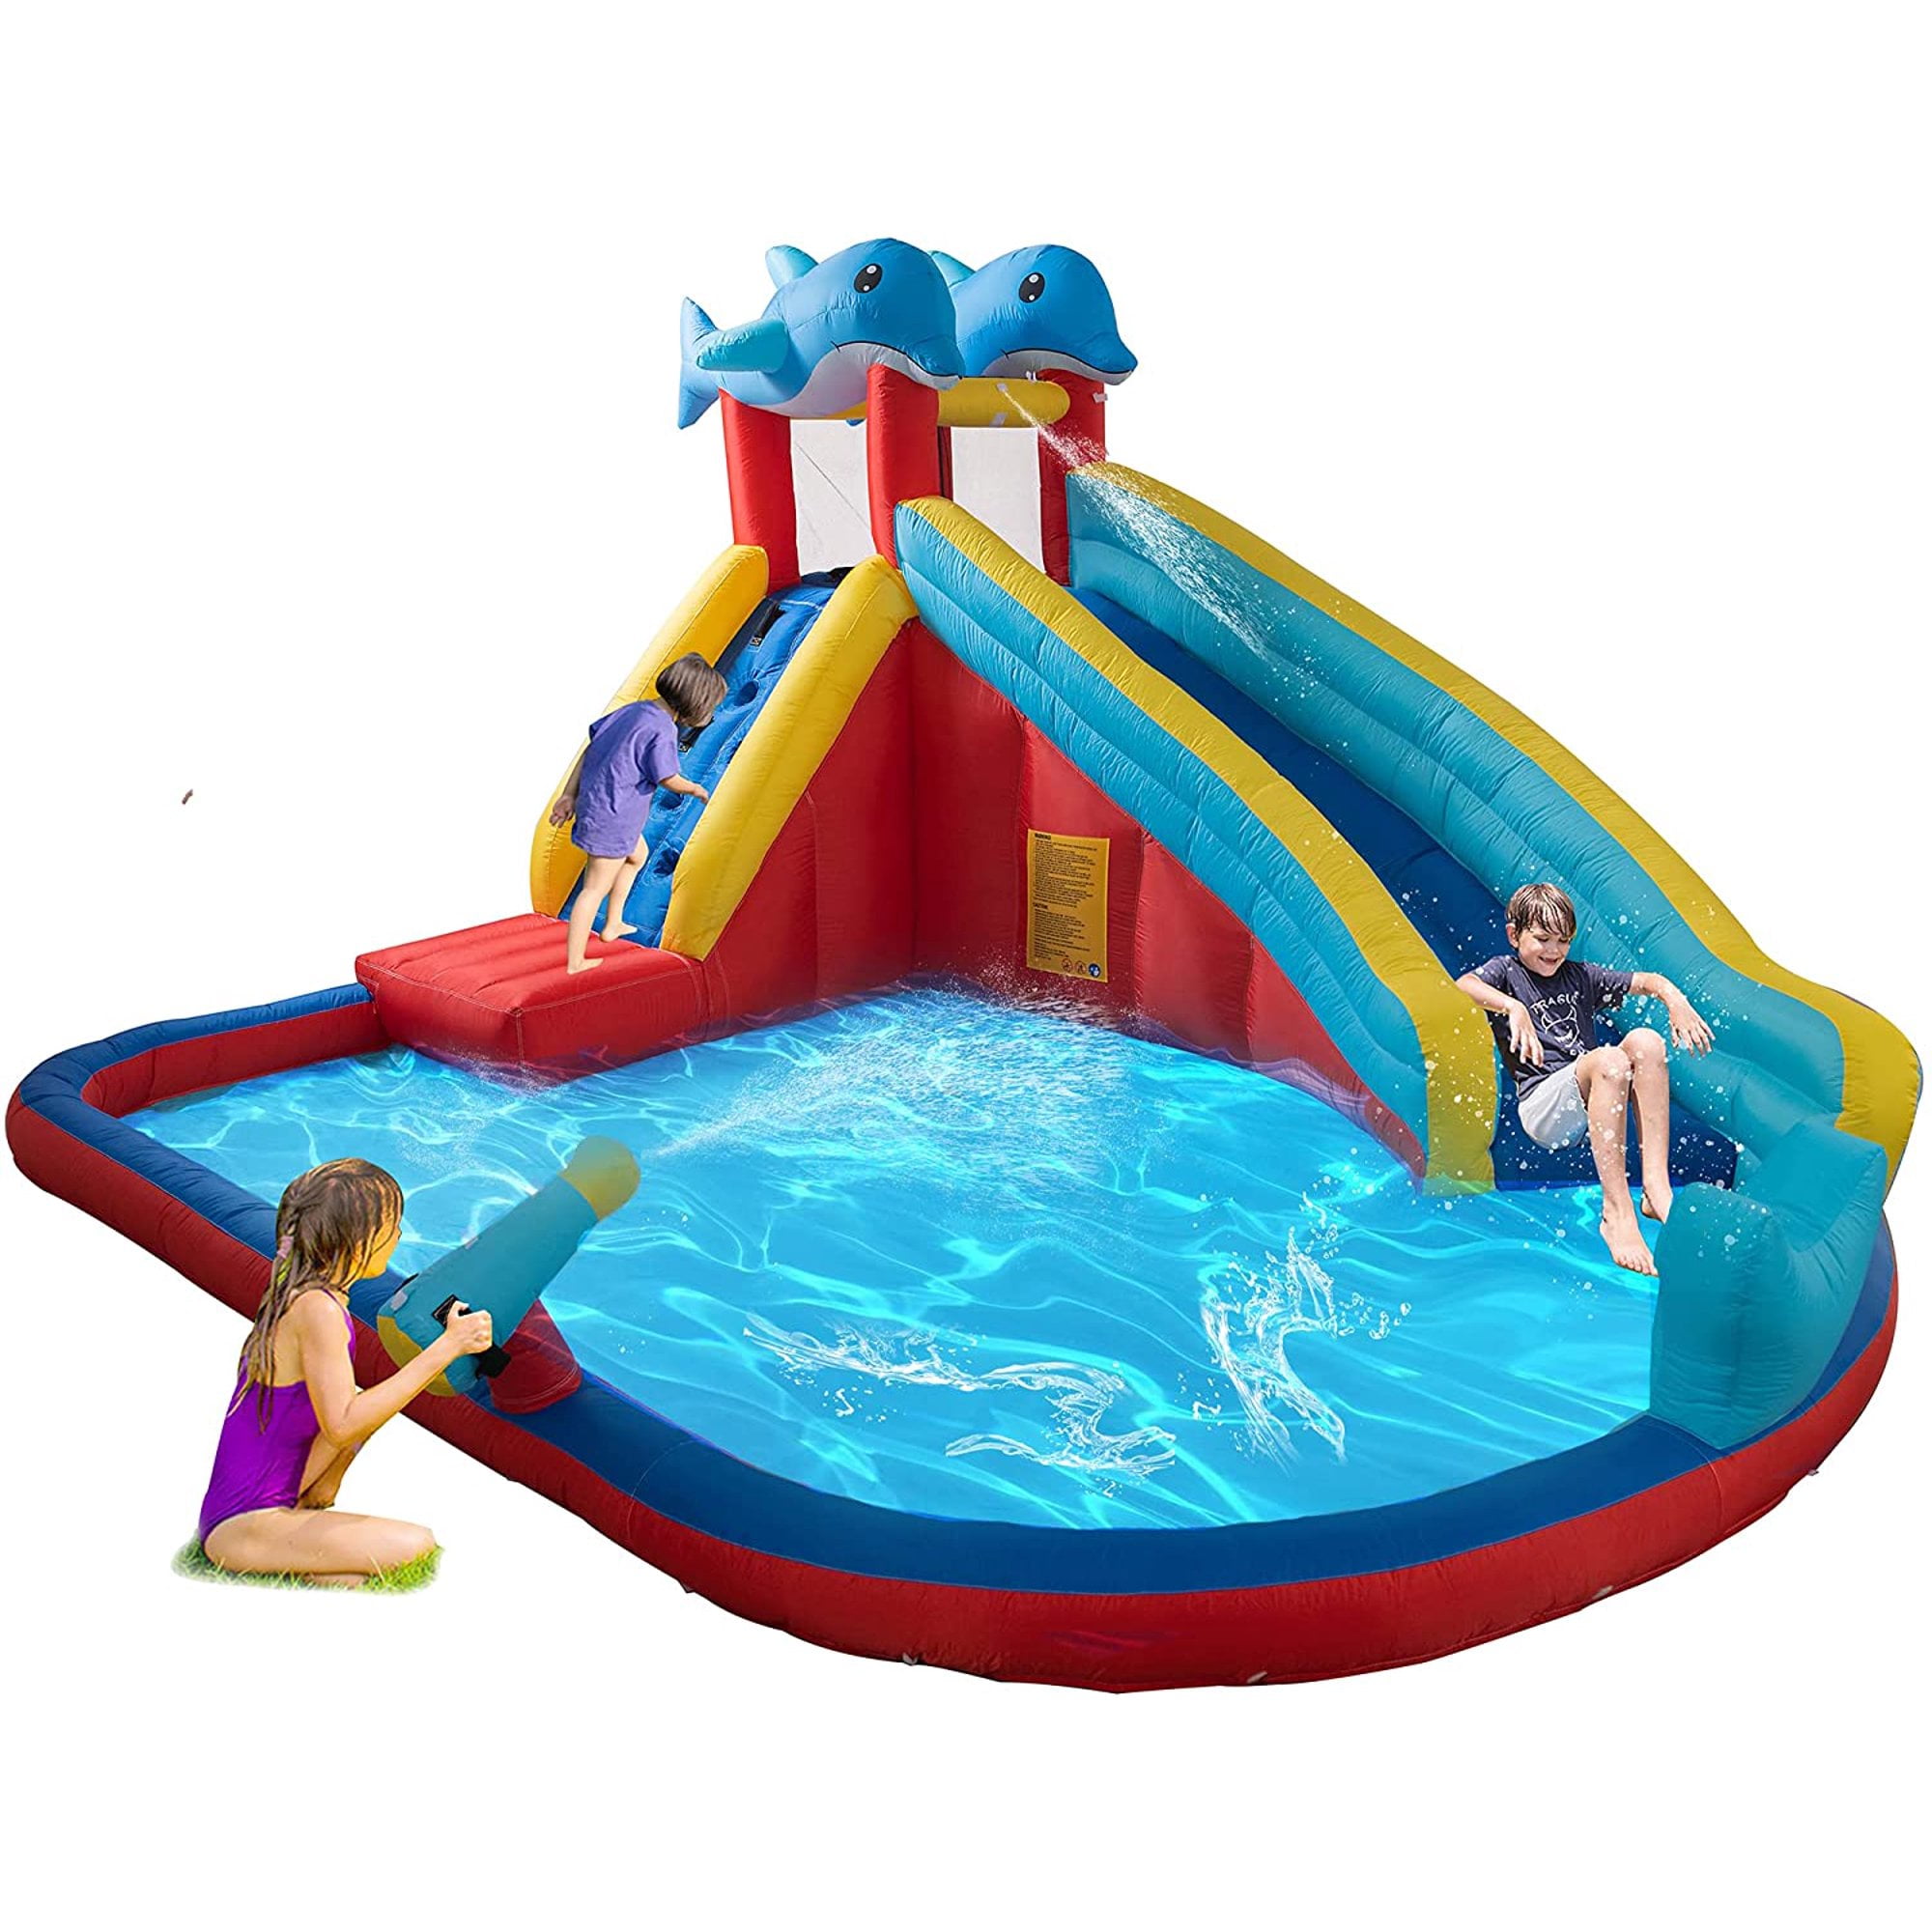 WelandFun Inflatable Water Slide Park with Splash Pool for Kids Kids Bouncy Castle with Air Blower for Outdoor Backyard Climbing Wall,Bounce House with Ball Shooting 